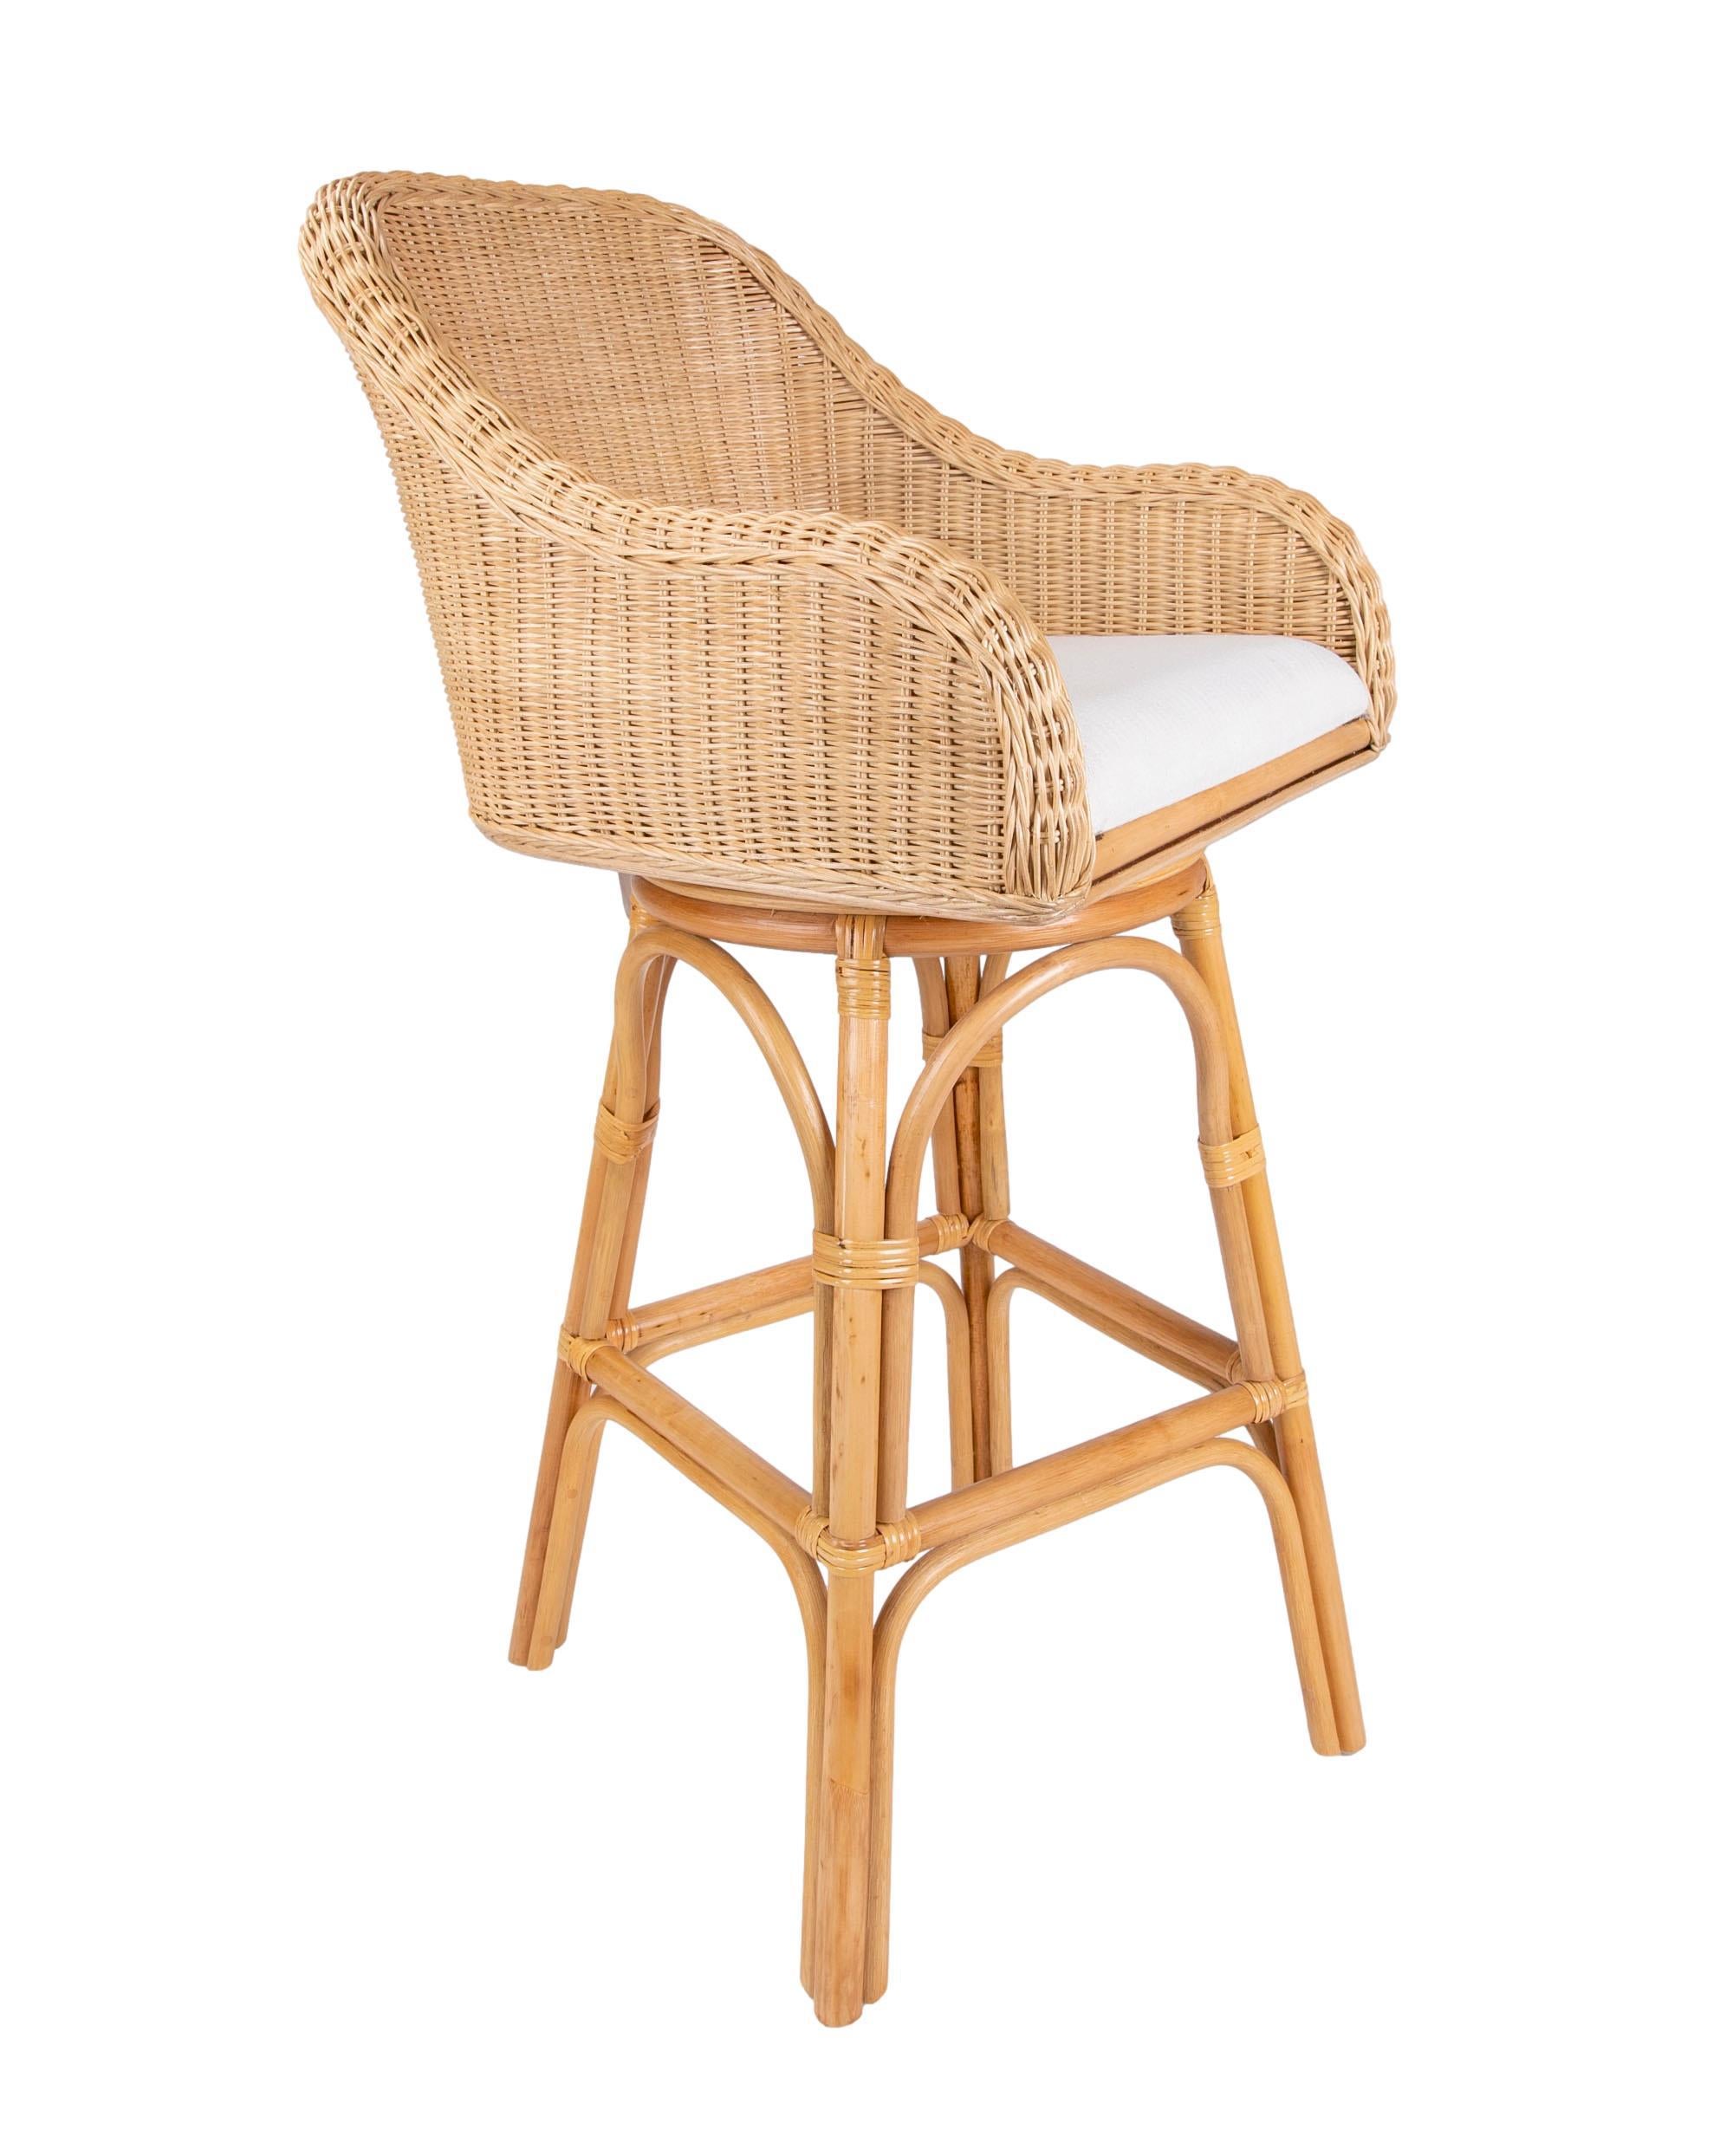 Pair of Two Upholstered Rattan and Wicker Bar stools with Sideways Movement
